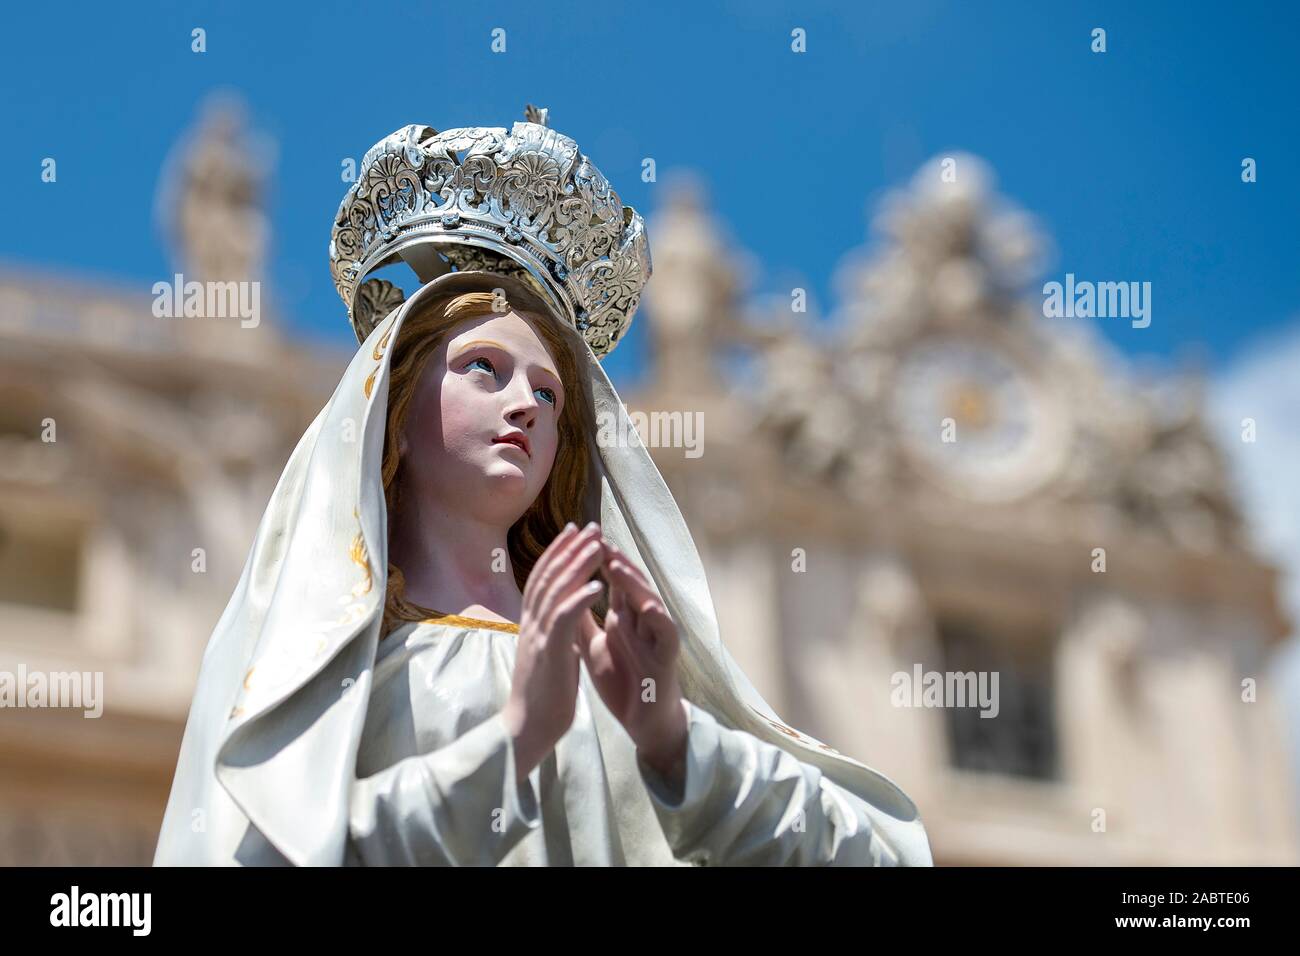 Statue of Mary Mother of Jesus, Vatican city. Stock Photo